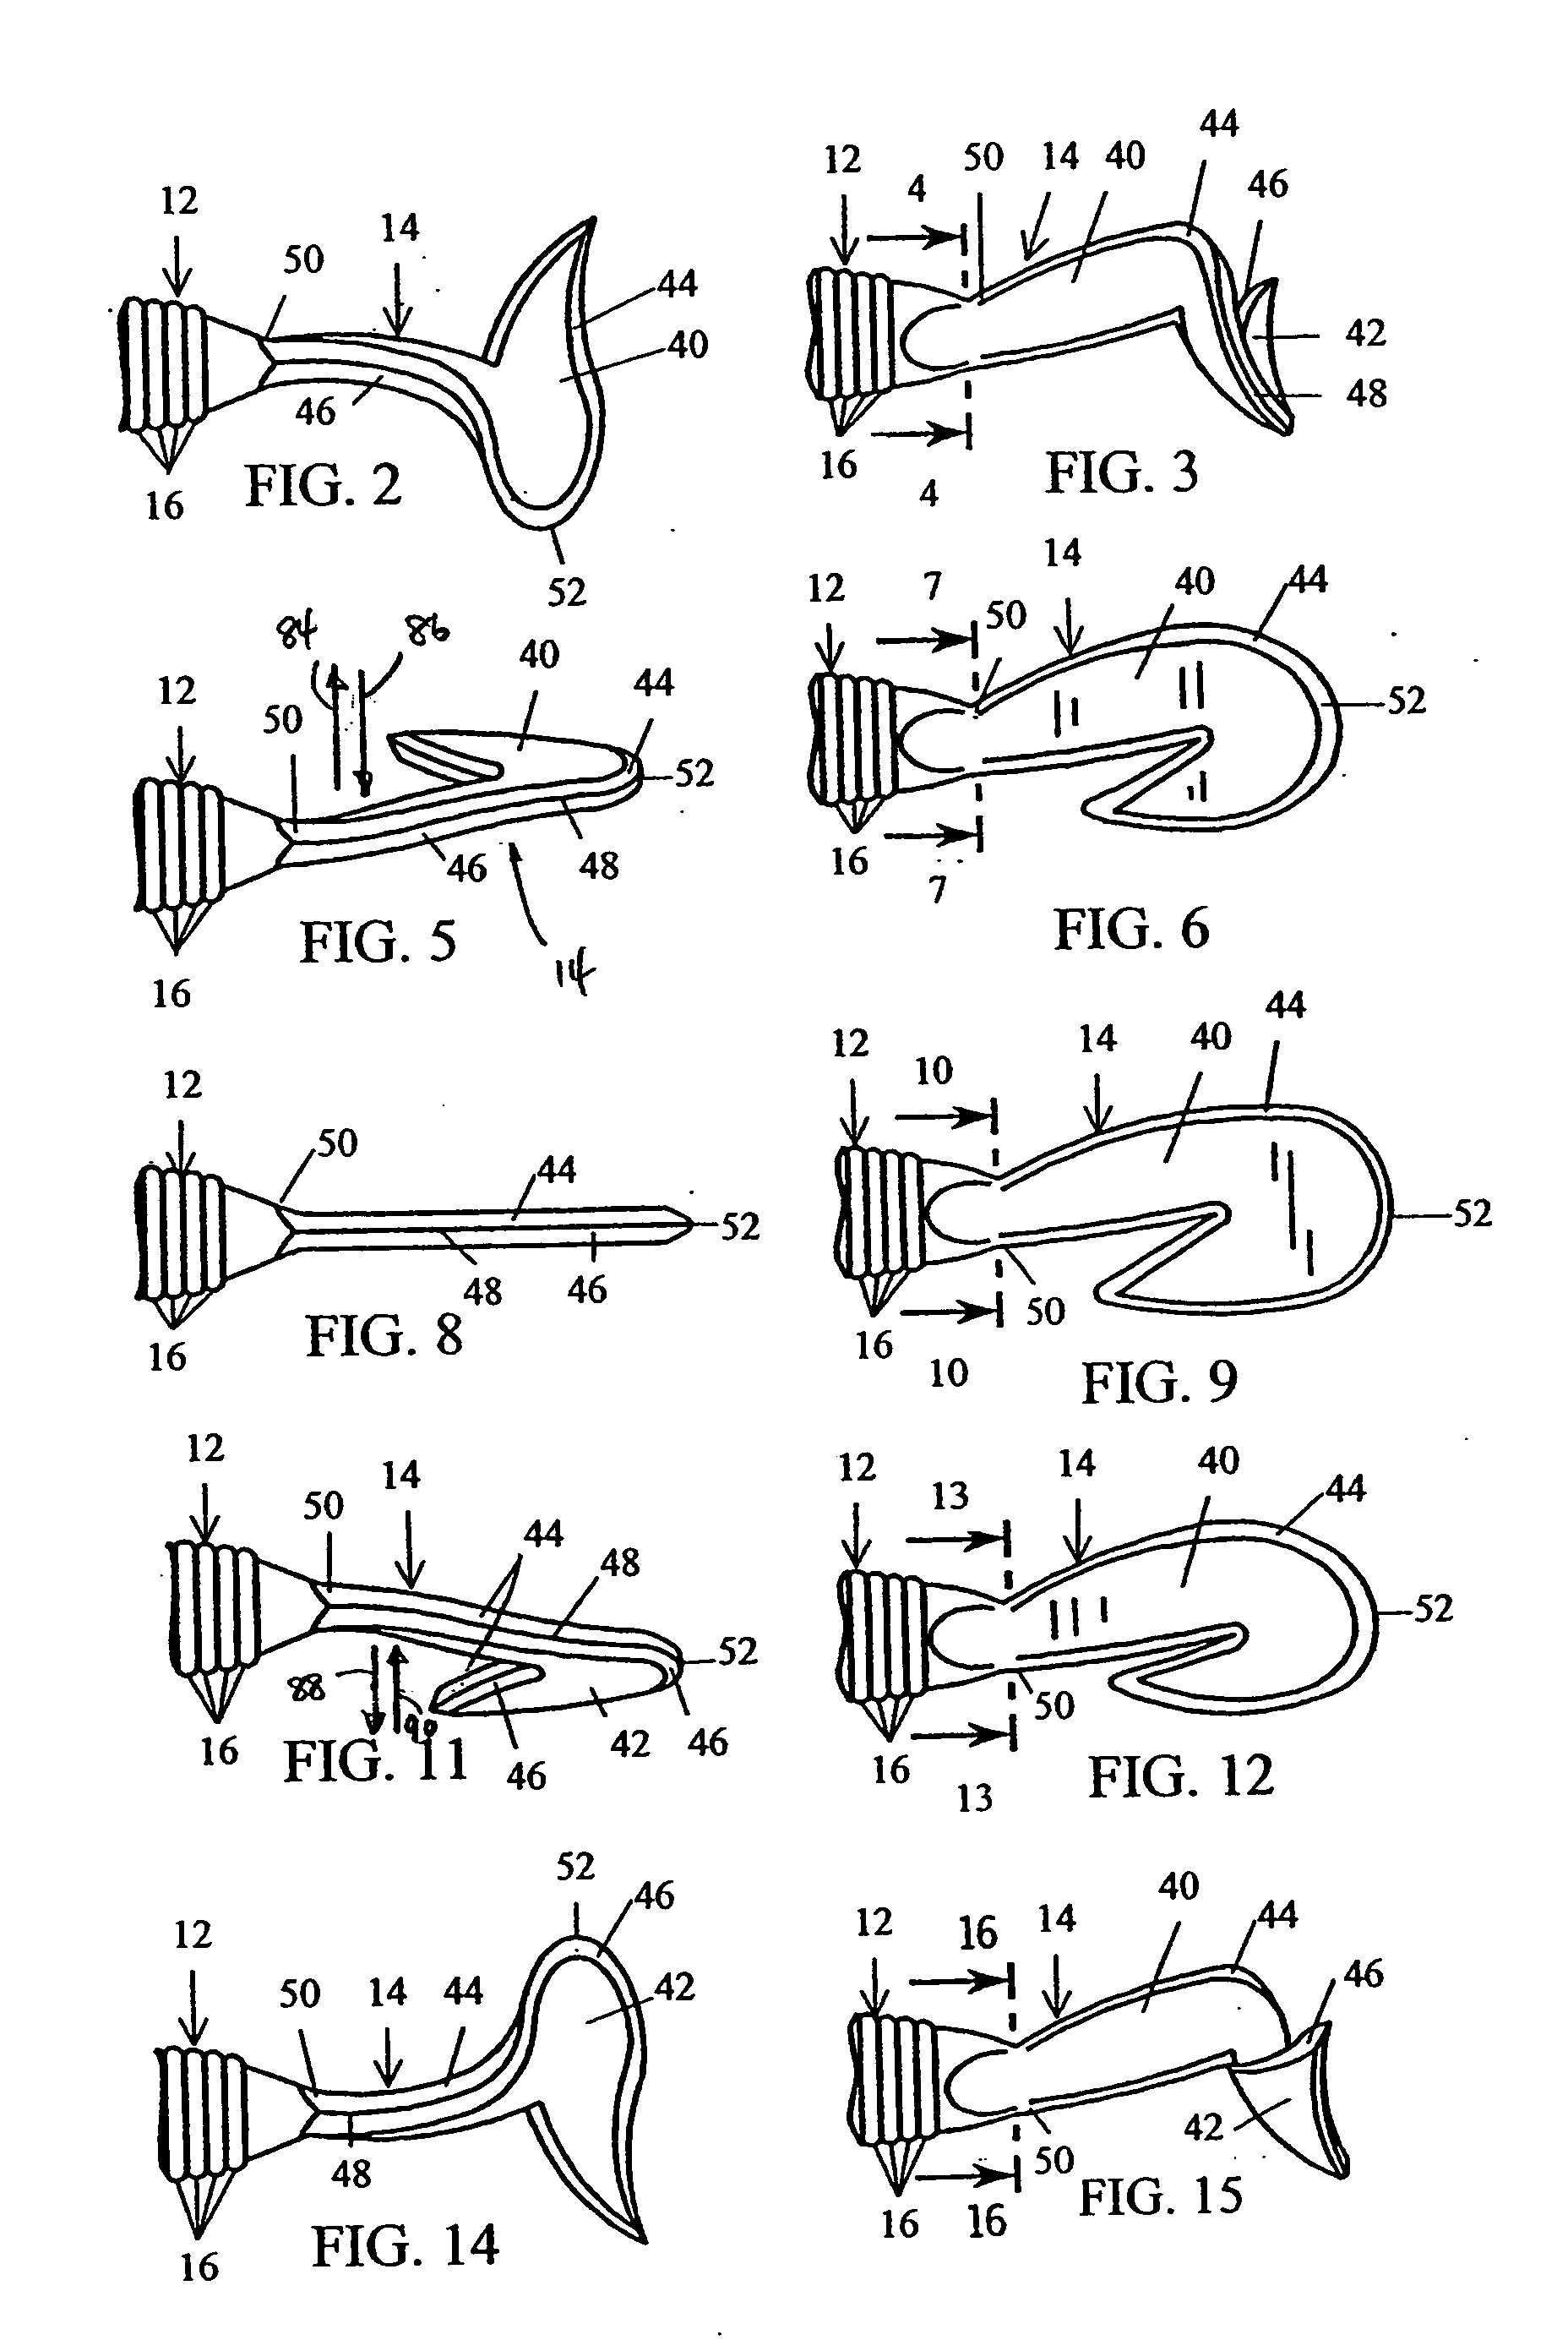 Tail configuration for an artificial fishing lure